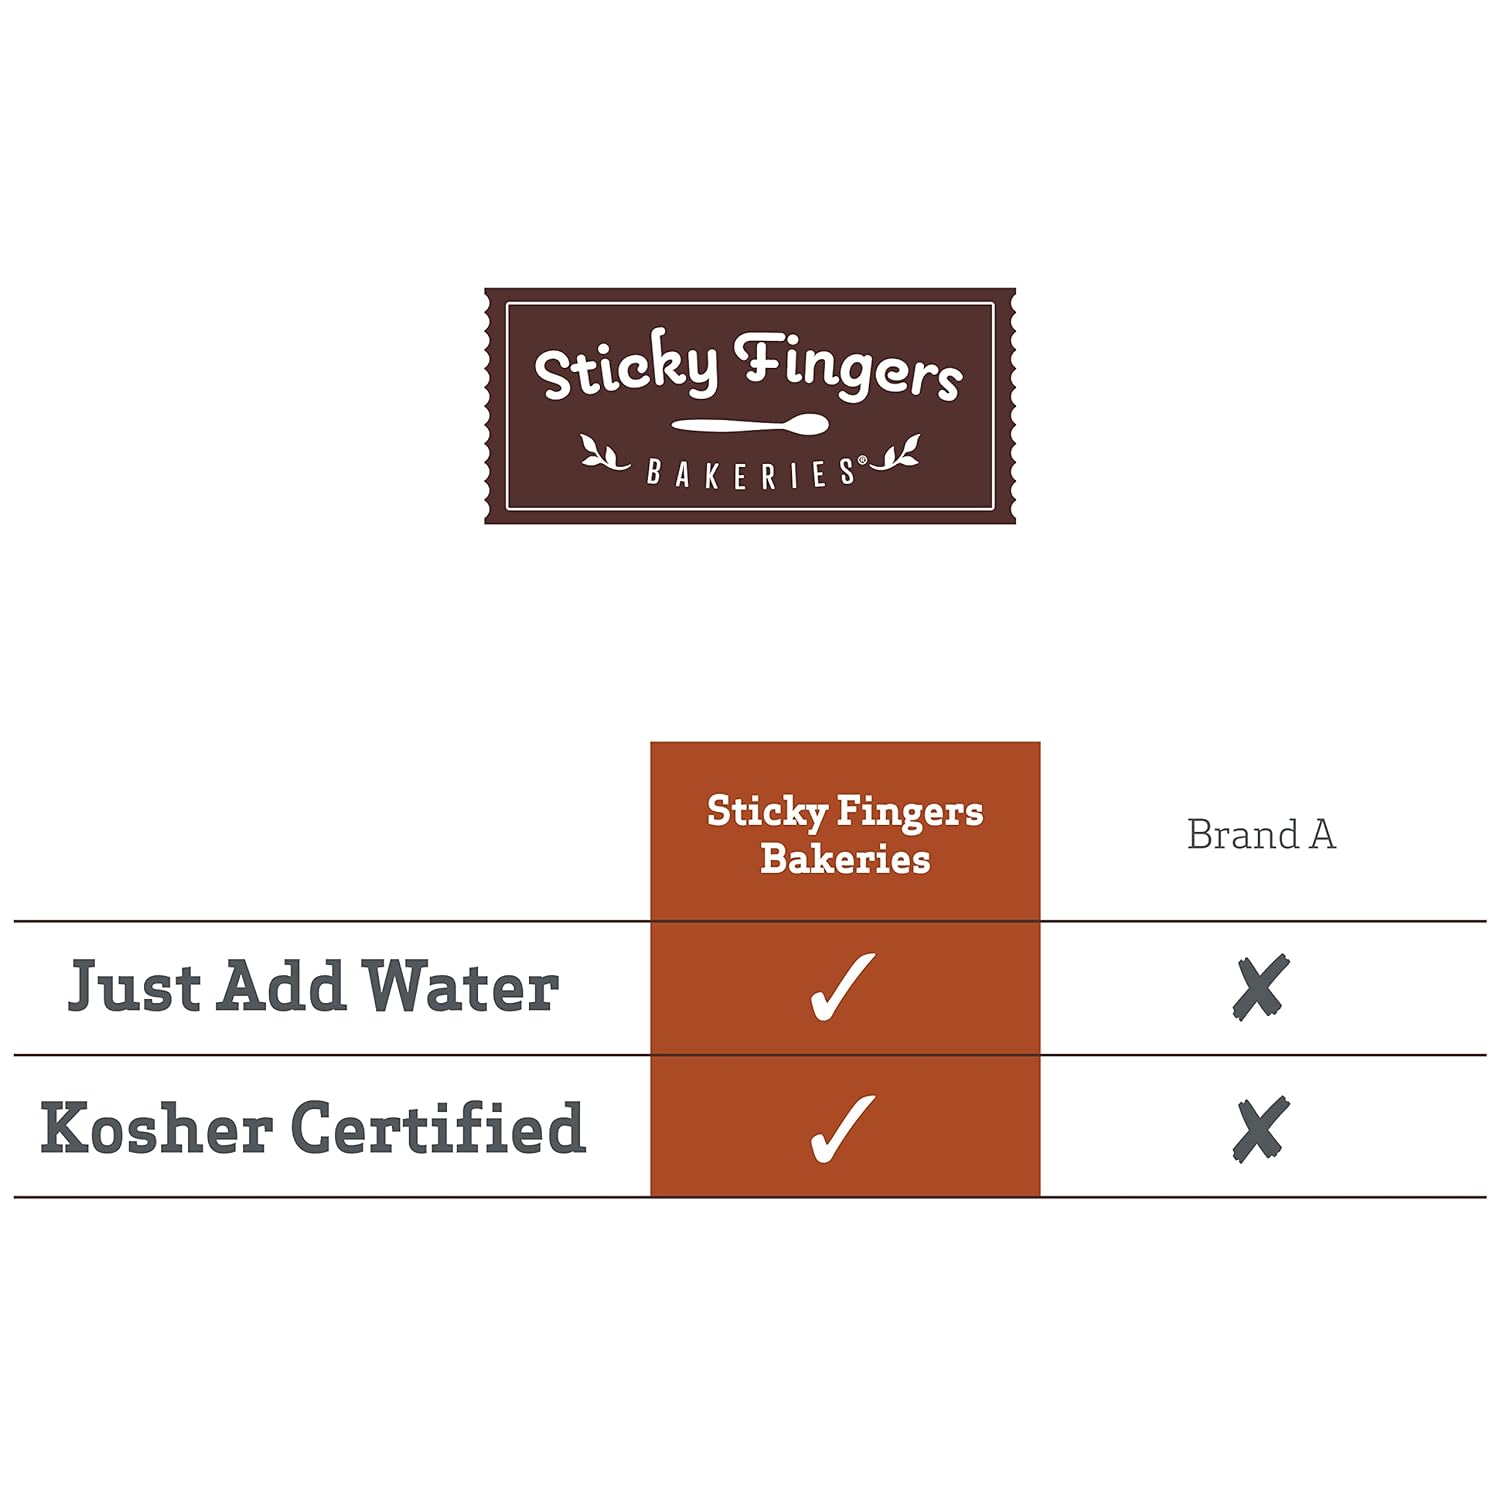 Fudge Brownie Mix by Sticky Fingers Bakeries – Baking Mix for Homemade Chocolate Fudge Brownies, Made with Semi Sweet Chocolate Chips, Makes 16 Brownies Per Pack : Grocery & Gourmet Food